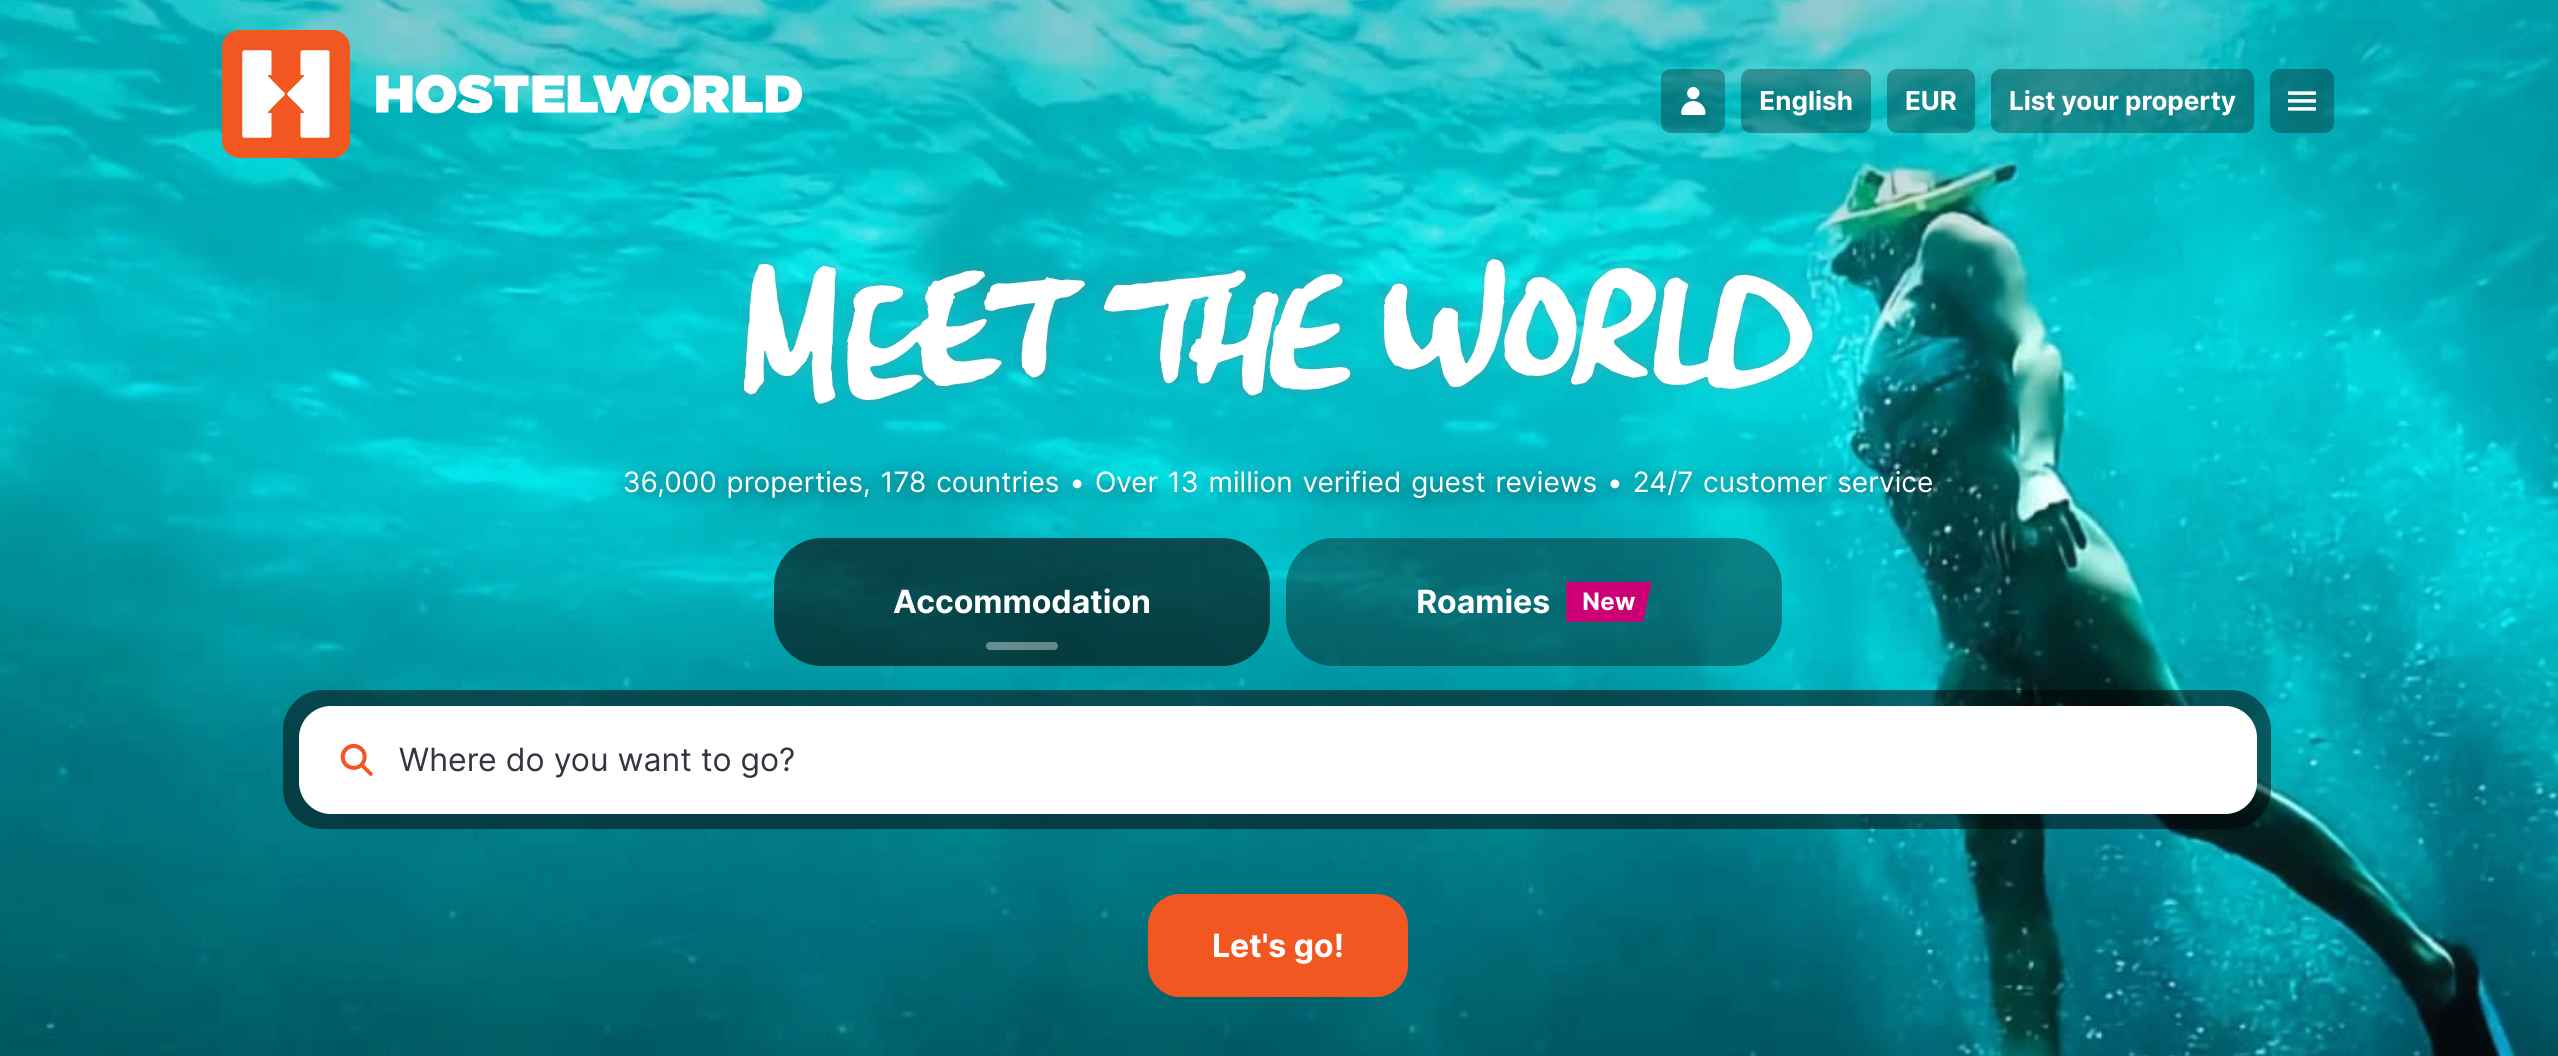 Hostelworld Main Page